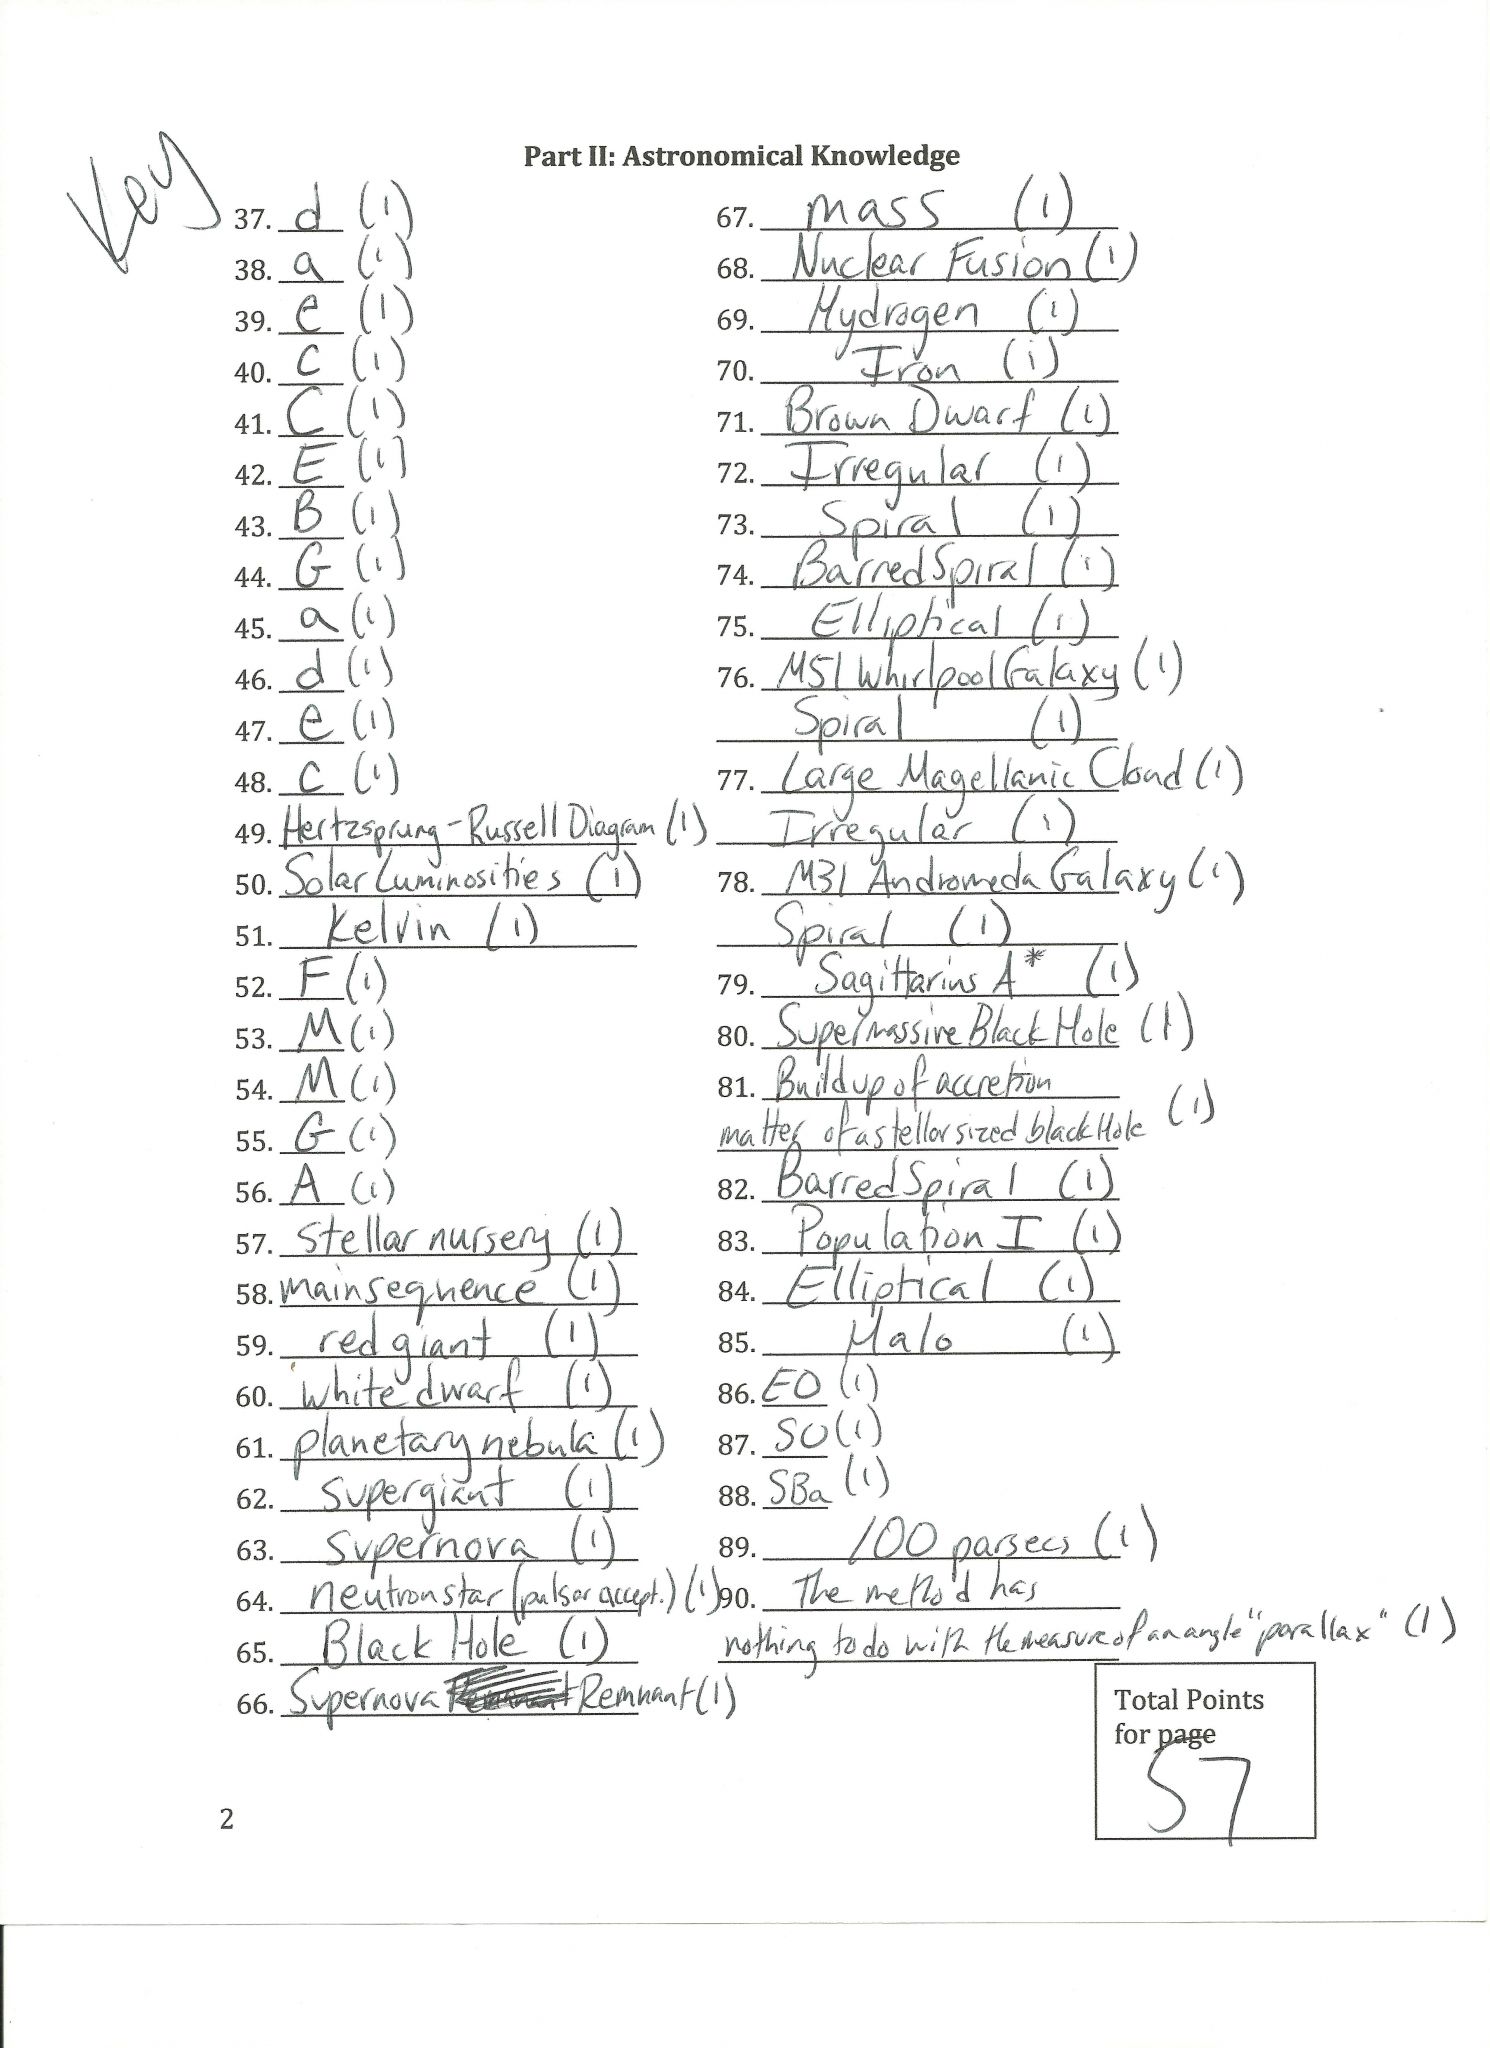 Mutations Worksheet Answer Key as Well as 2012 Test Exchange Science Olympiad Student Center Wiki